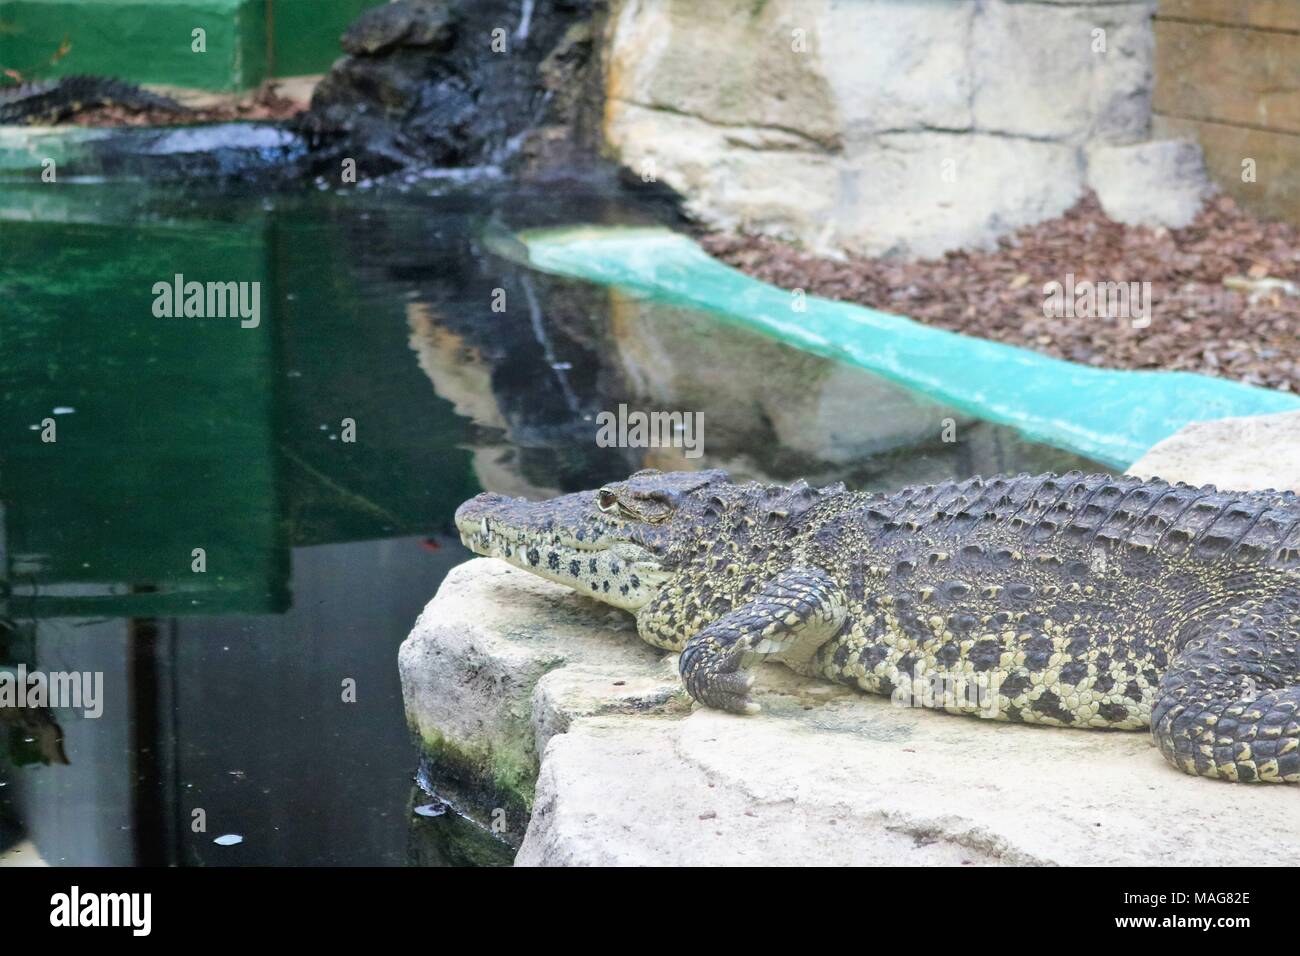 Black Caiman alligator lying on a rock near water at a visitors attraction Stock Photo